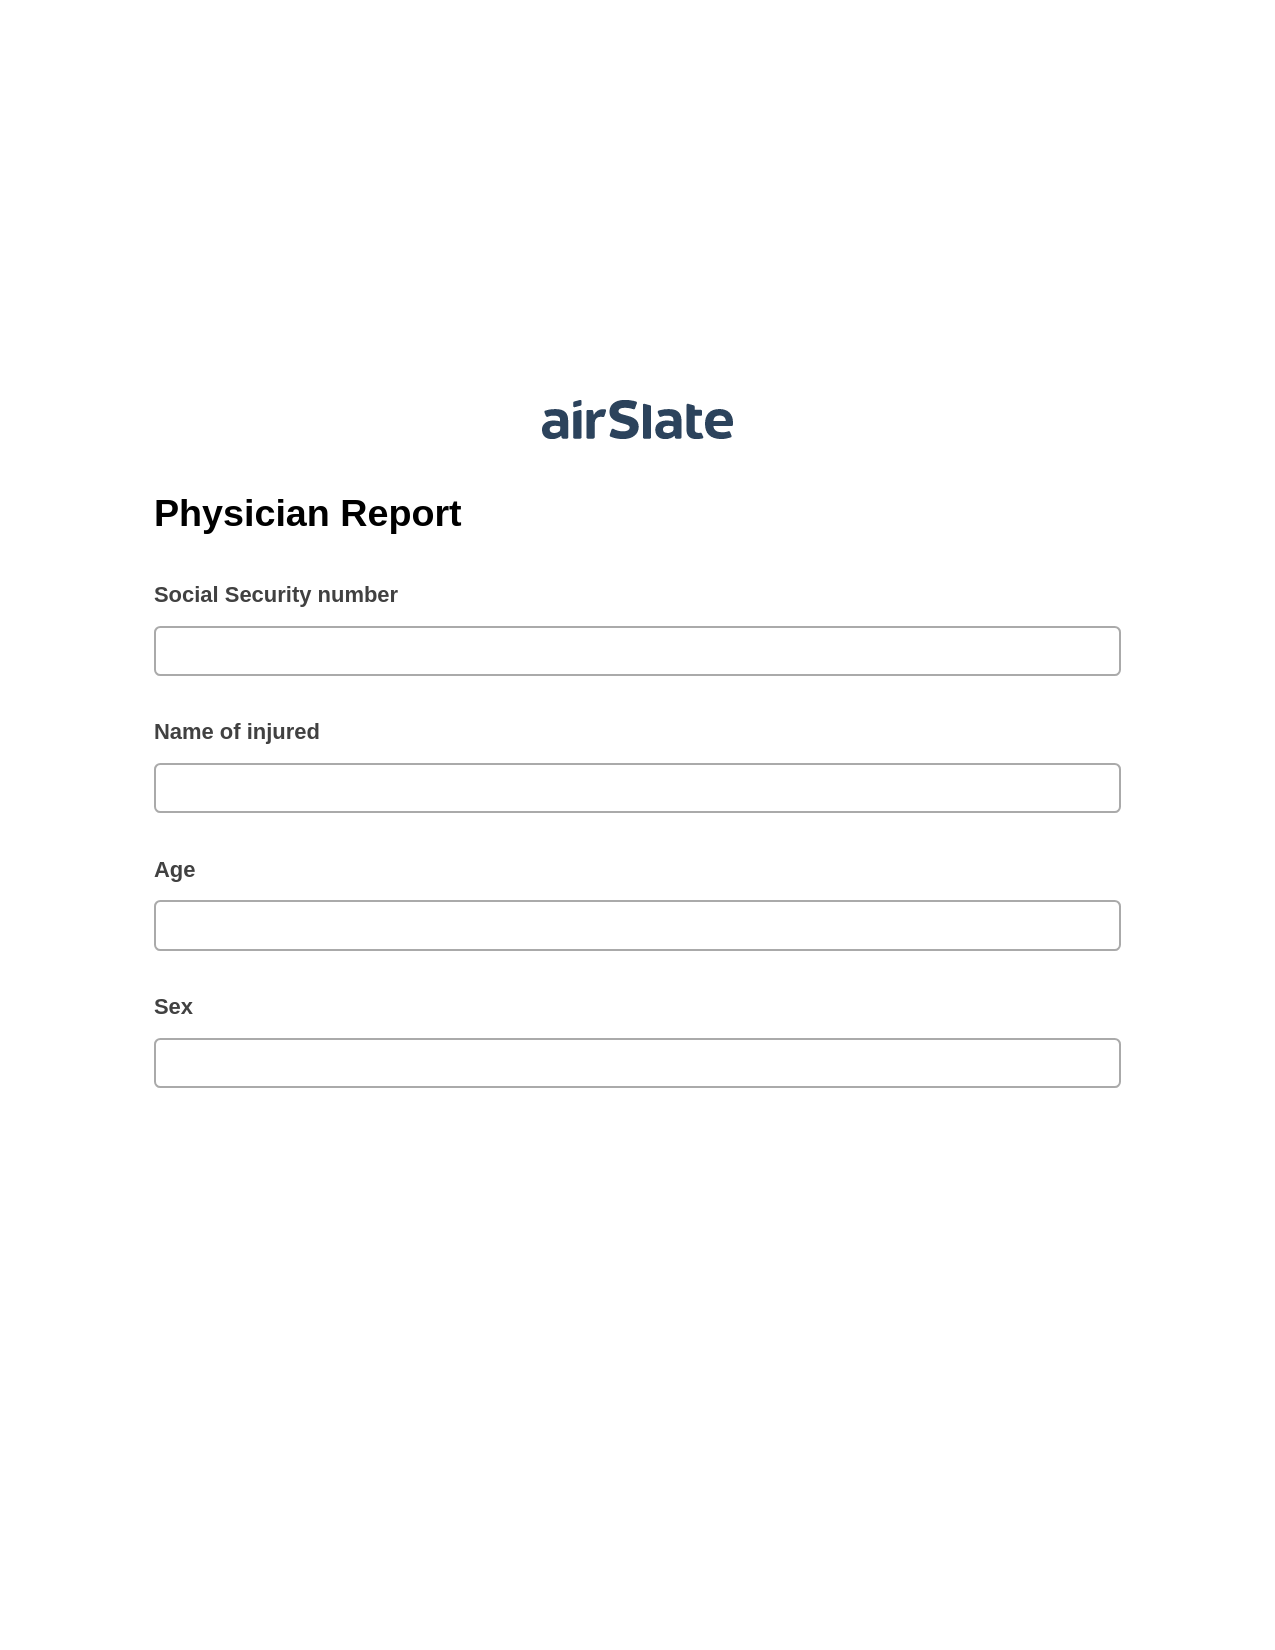 Physician Report Pre-fill from Excel Spreadsheet Bot, Lock the Slate Bot, Webhook Postfinish Bot